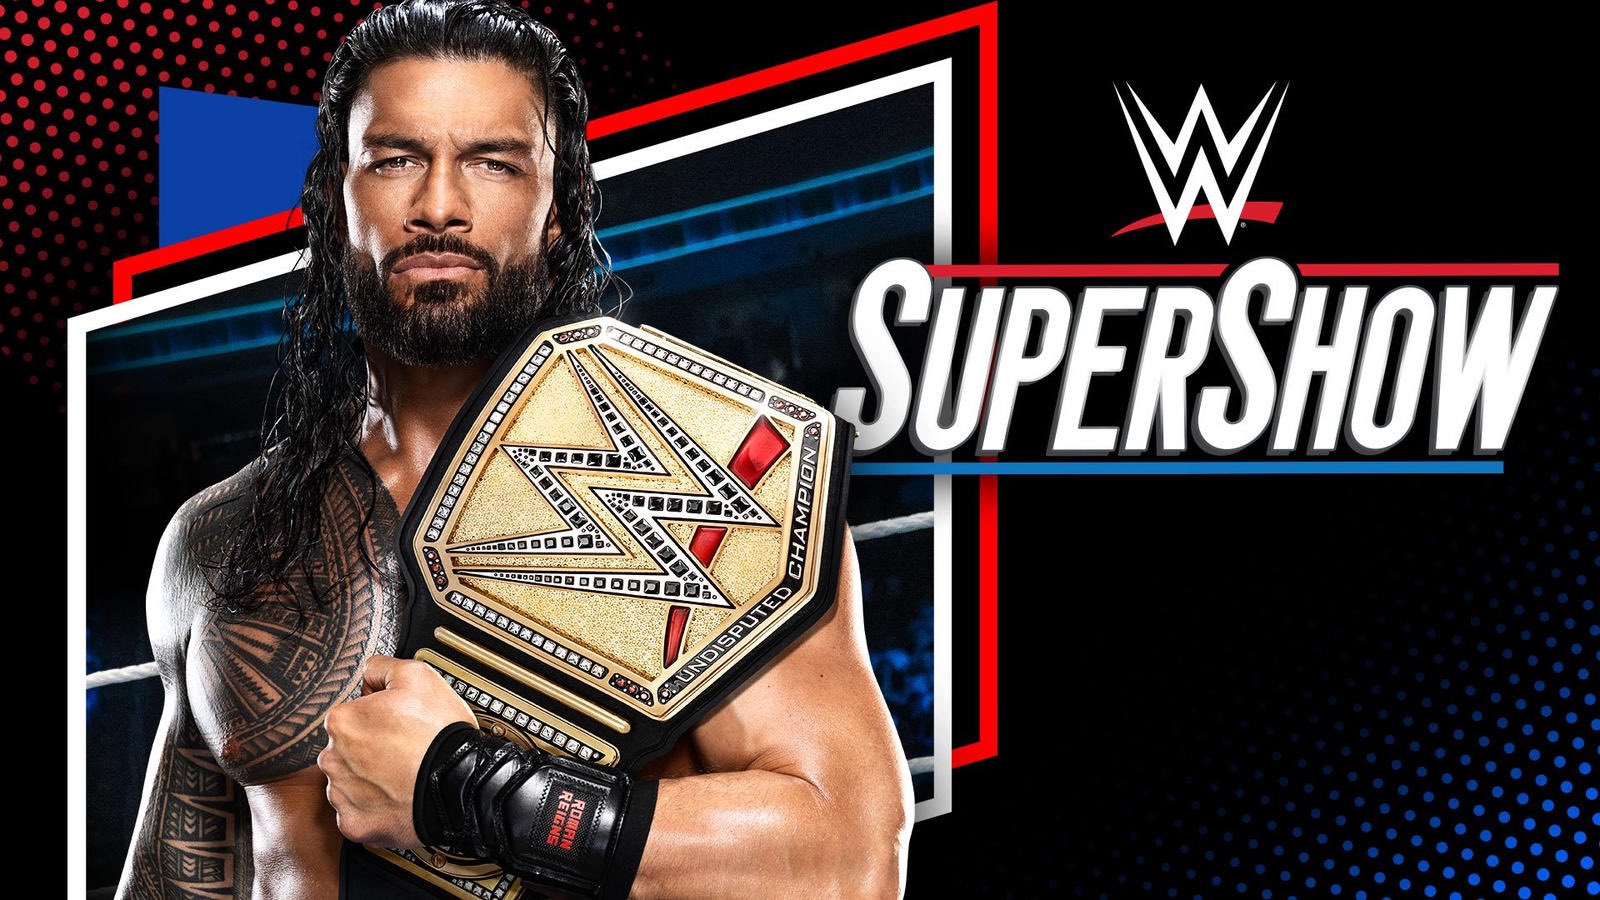 Roman Reigns to Compete in Title Match at October 14 Live Event